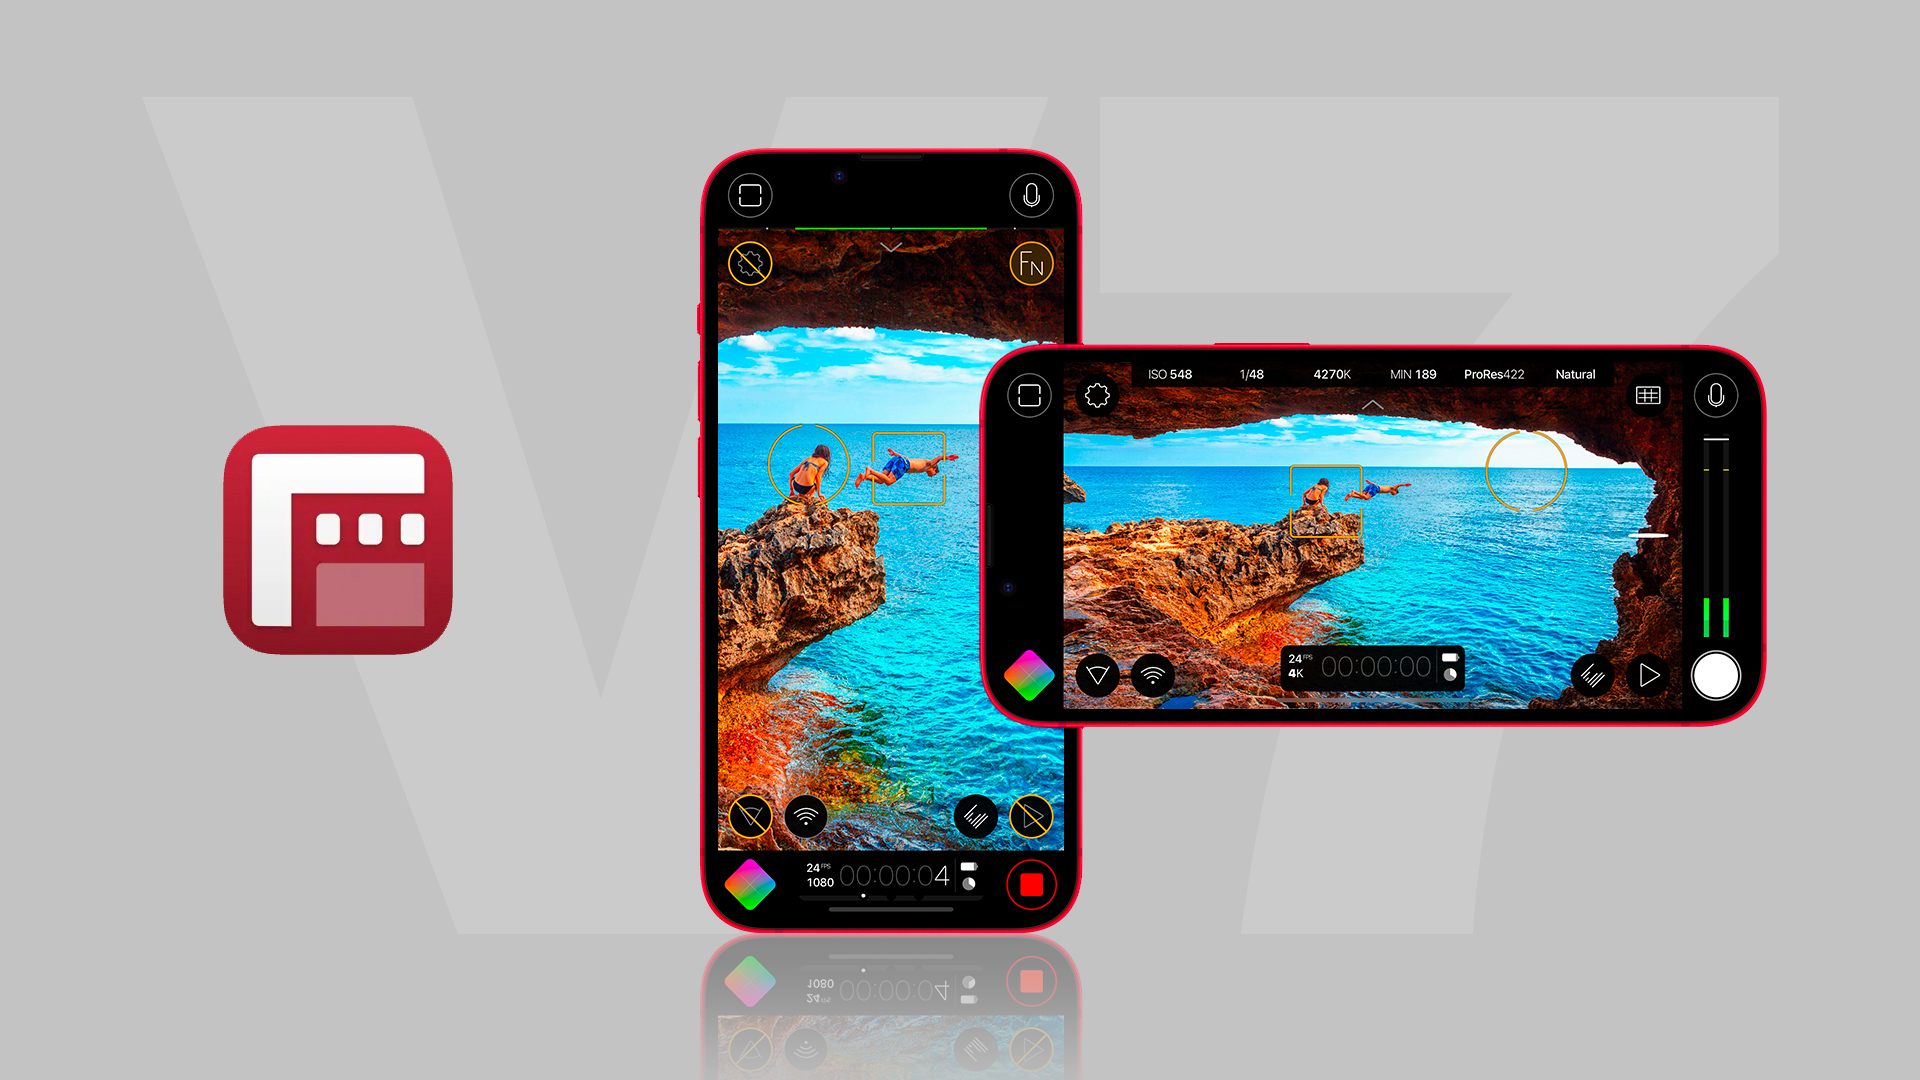 Filmic Pro v7 Launched – Redesigned UI, Custom Function Button and More